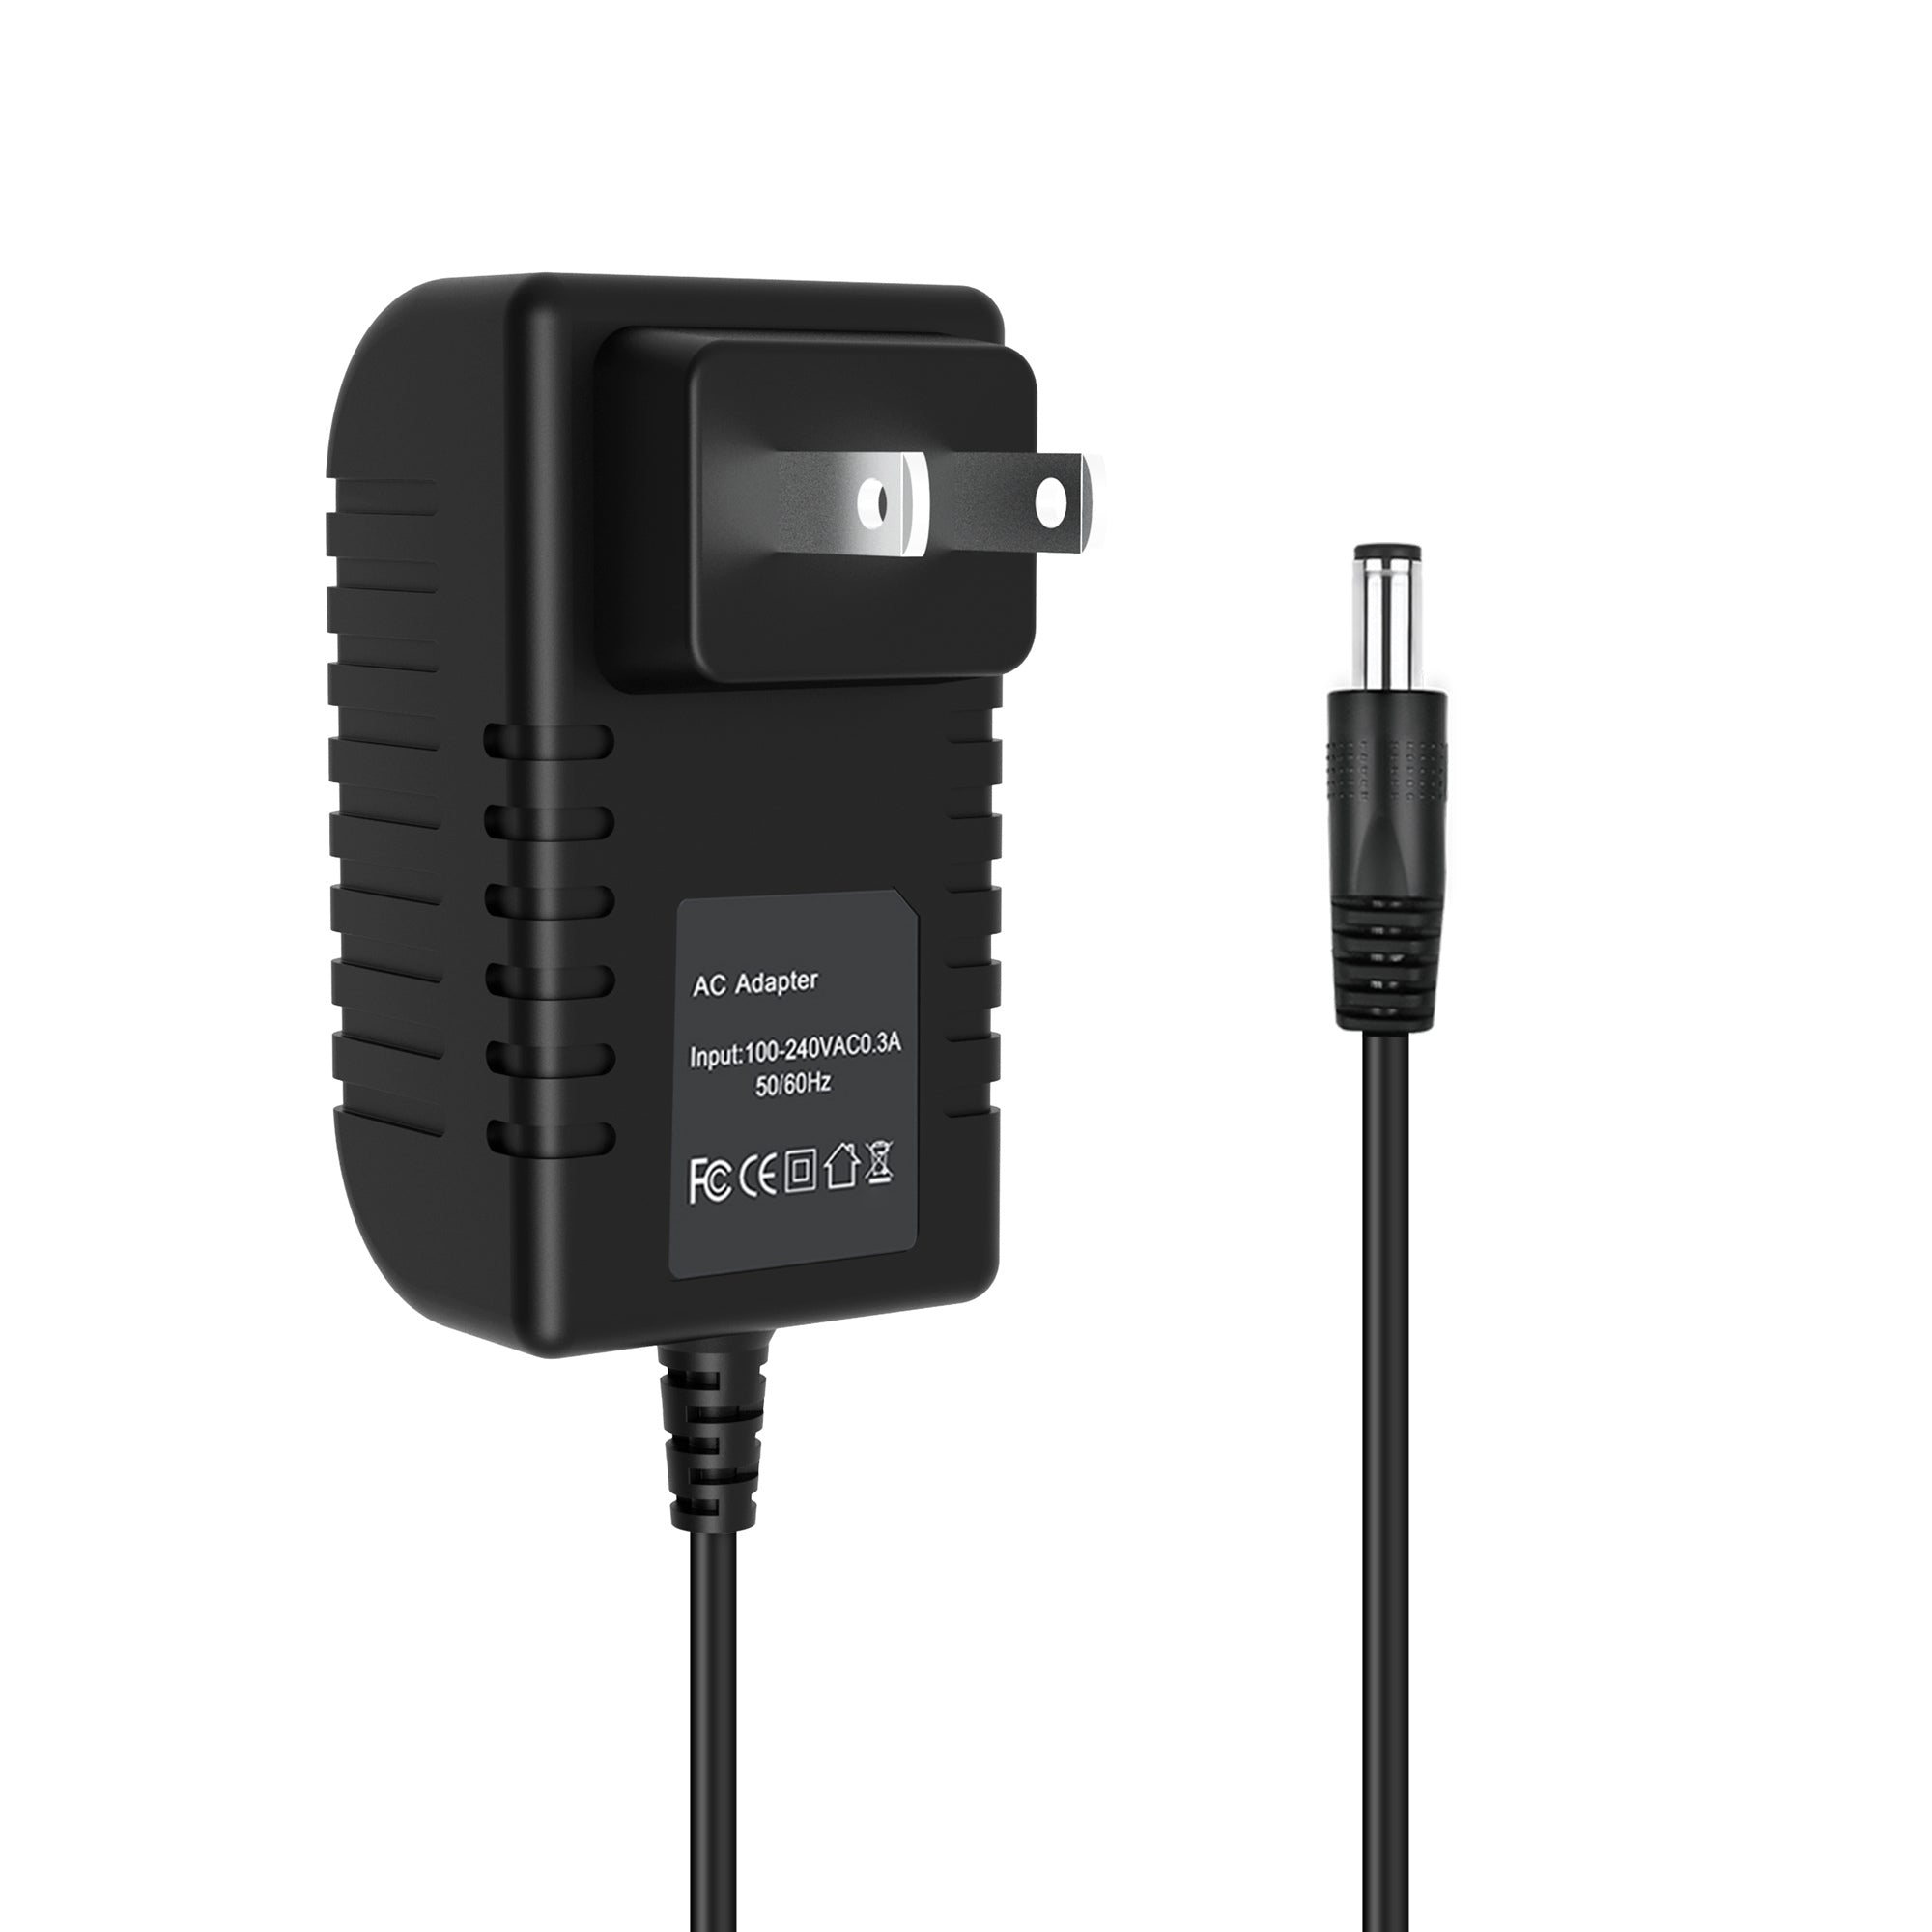 AbleGrid AC Adapte Compatible with Pioneer AirWare Inno XM2Go GEX-MP3 XM Satellite Radio Power Supply Cord Cable PS Wall Home Charger Input: 100 - 240 VAC 50/60Hz Worldwide Voltage Use Mains PSU